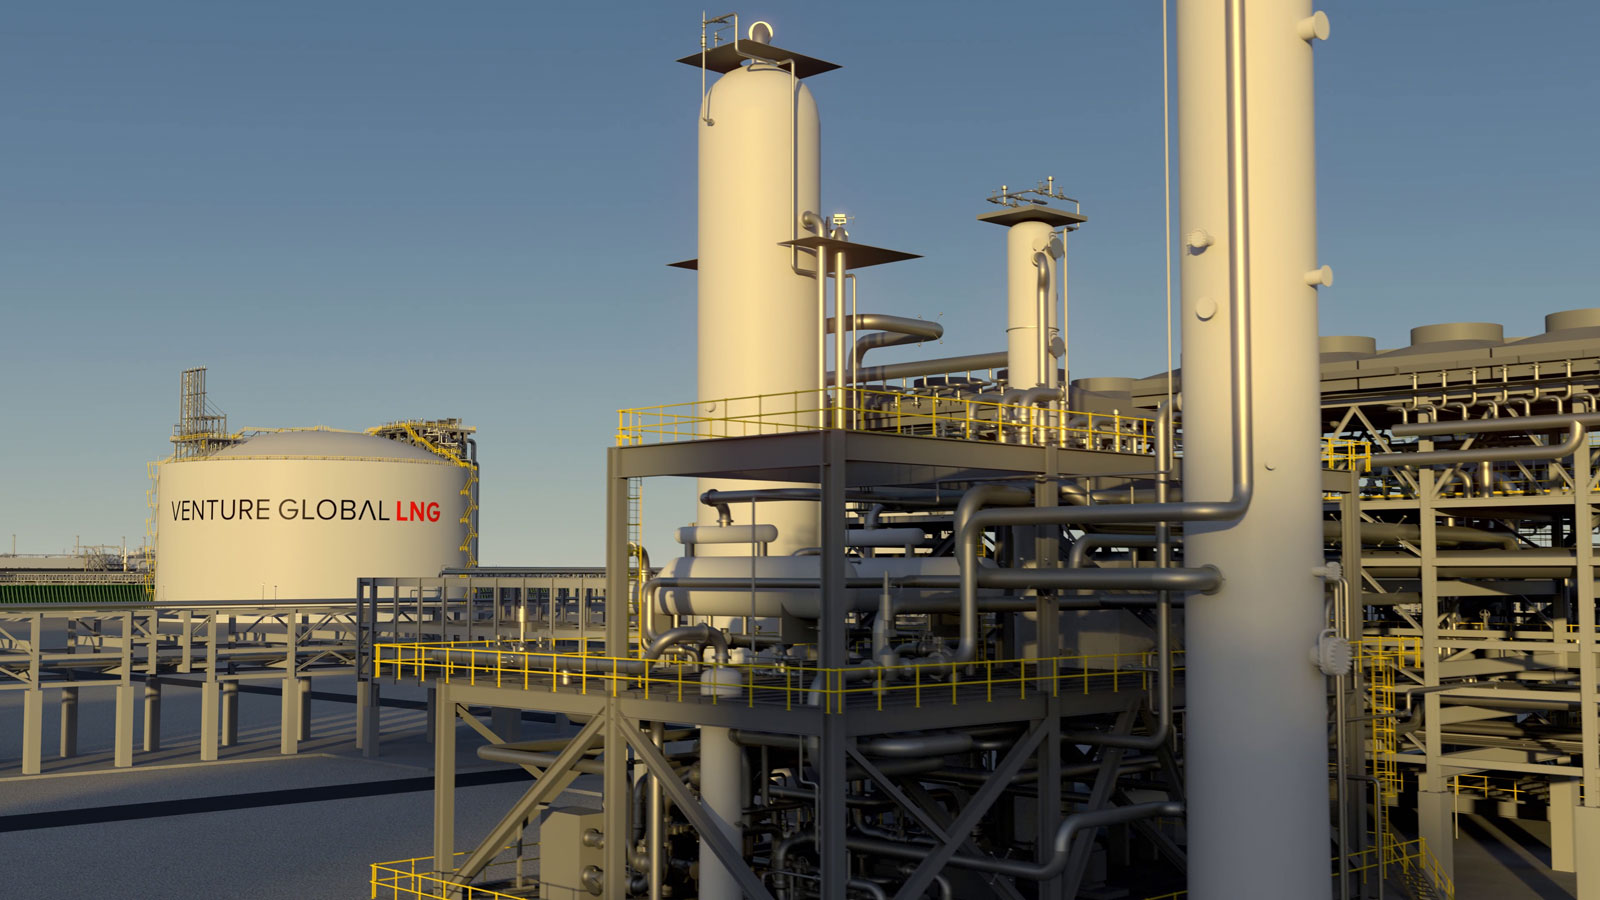 Shell to buy LNG from Venture Global’s Plaquemines plant